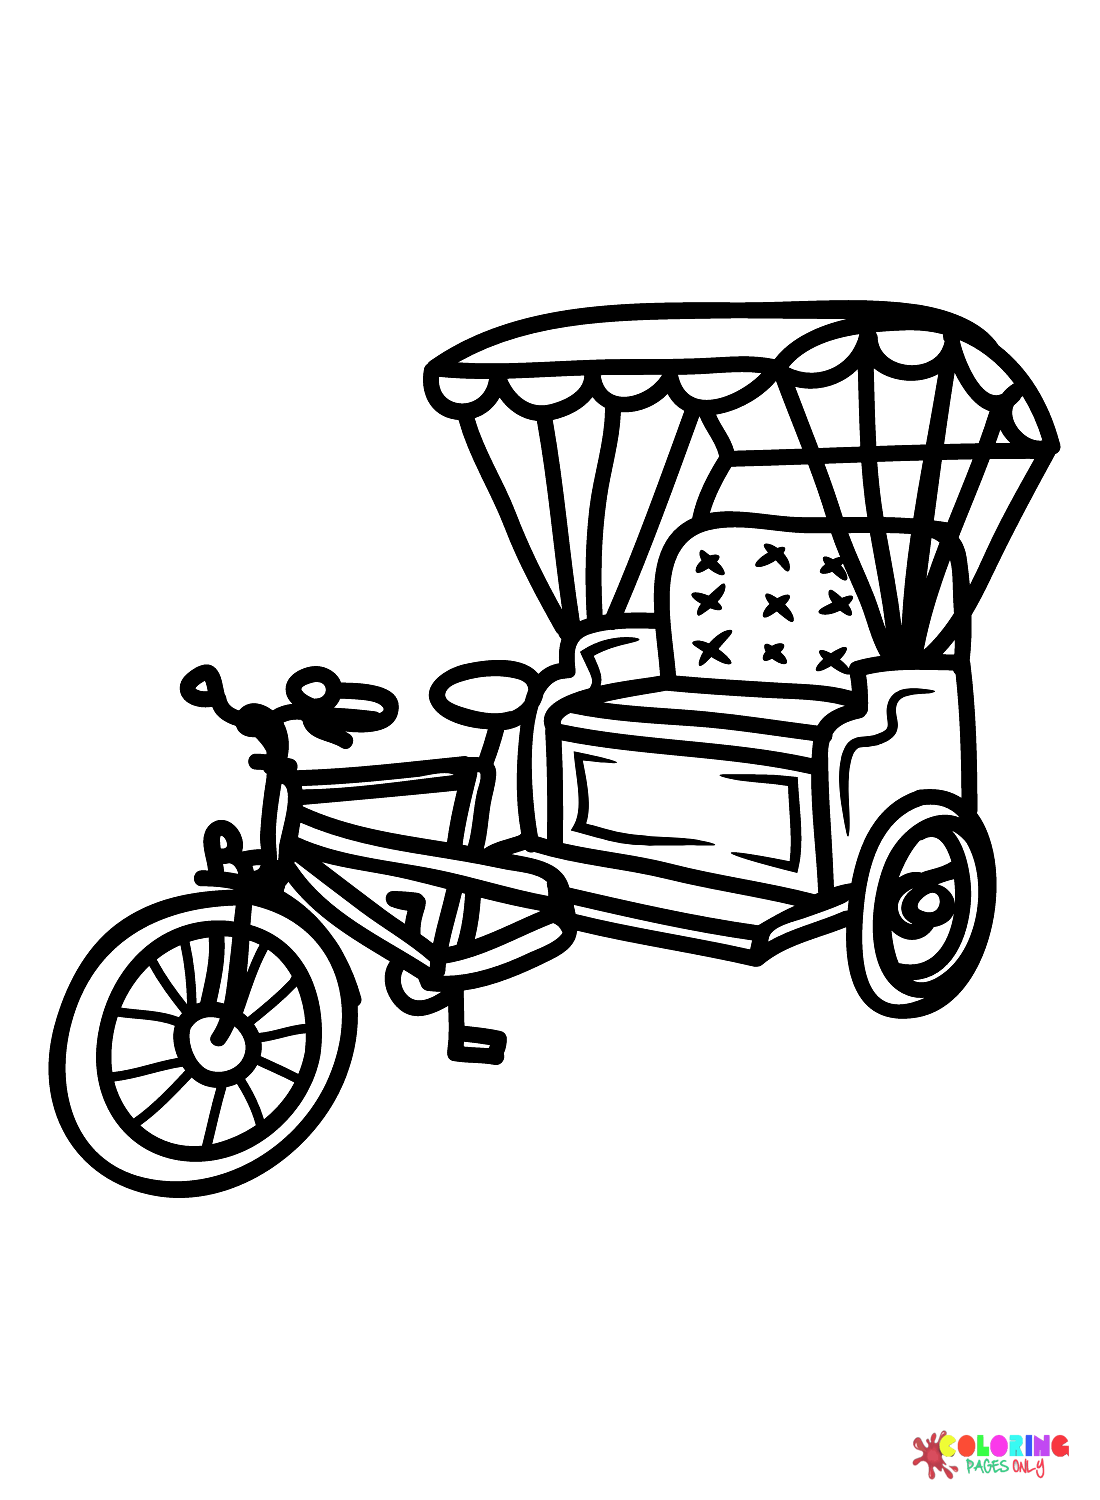 Tricycle coloring pages